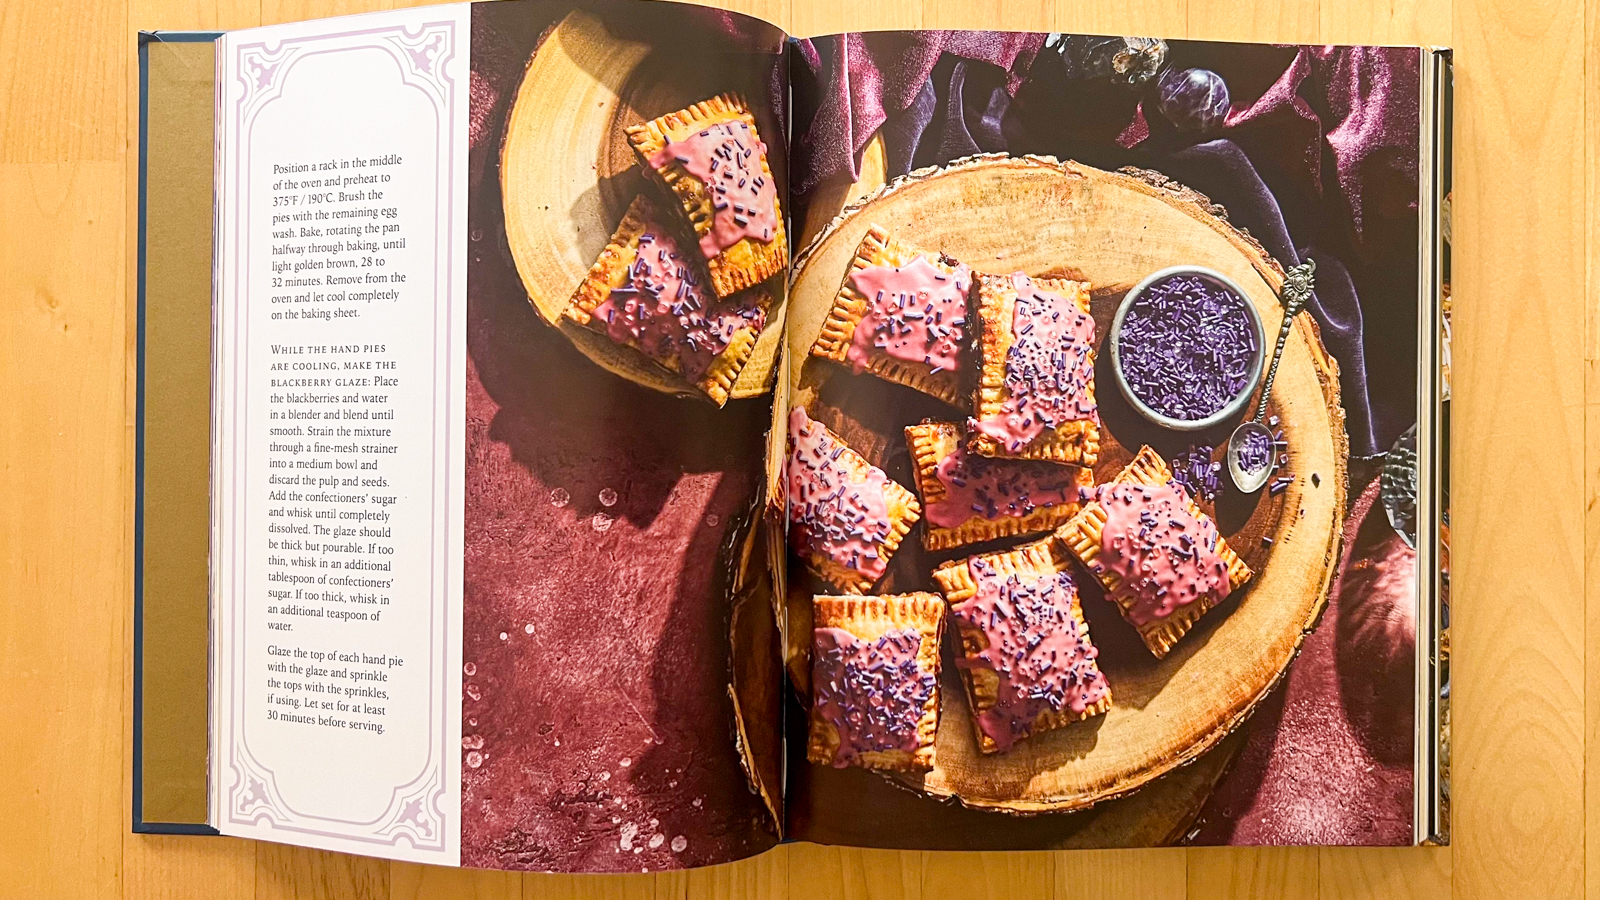 A photo of a food spread in the cookbook